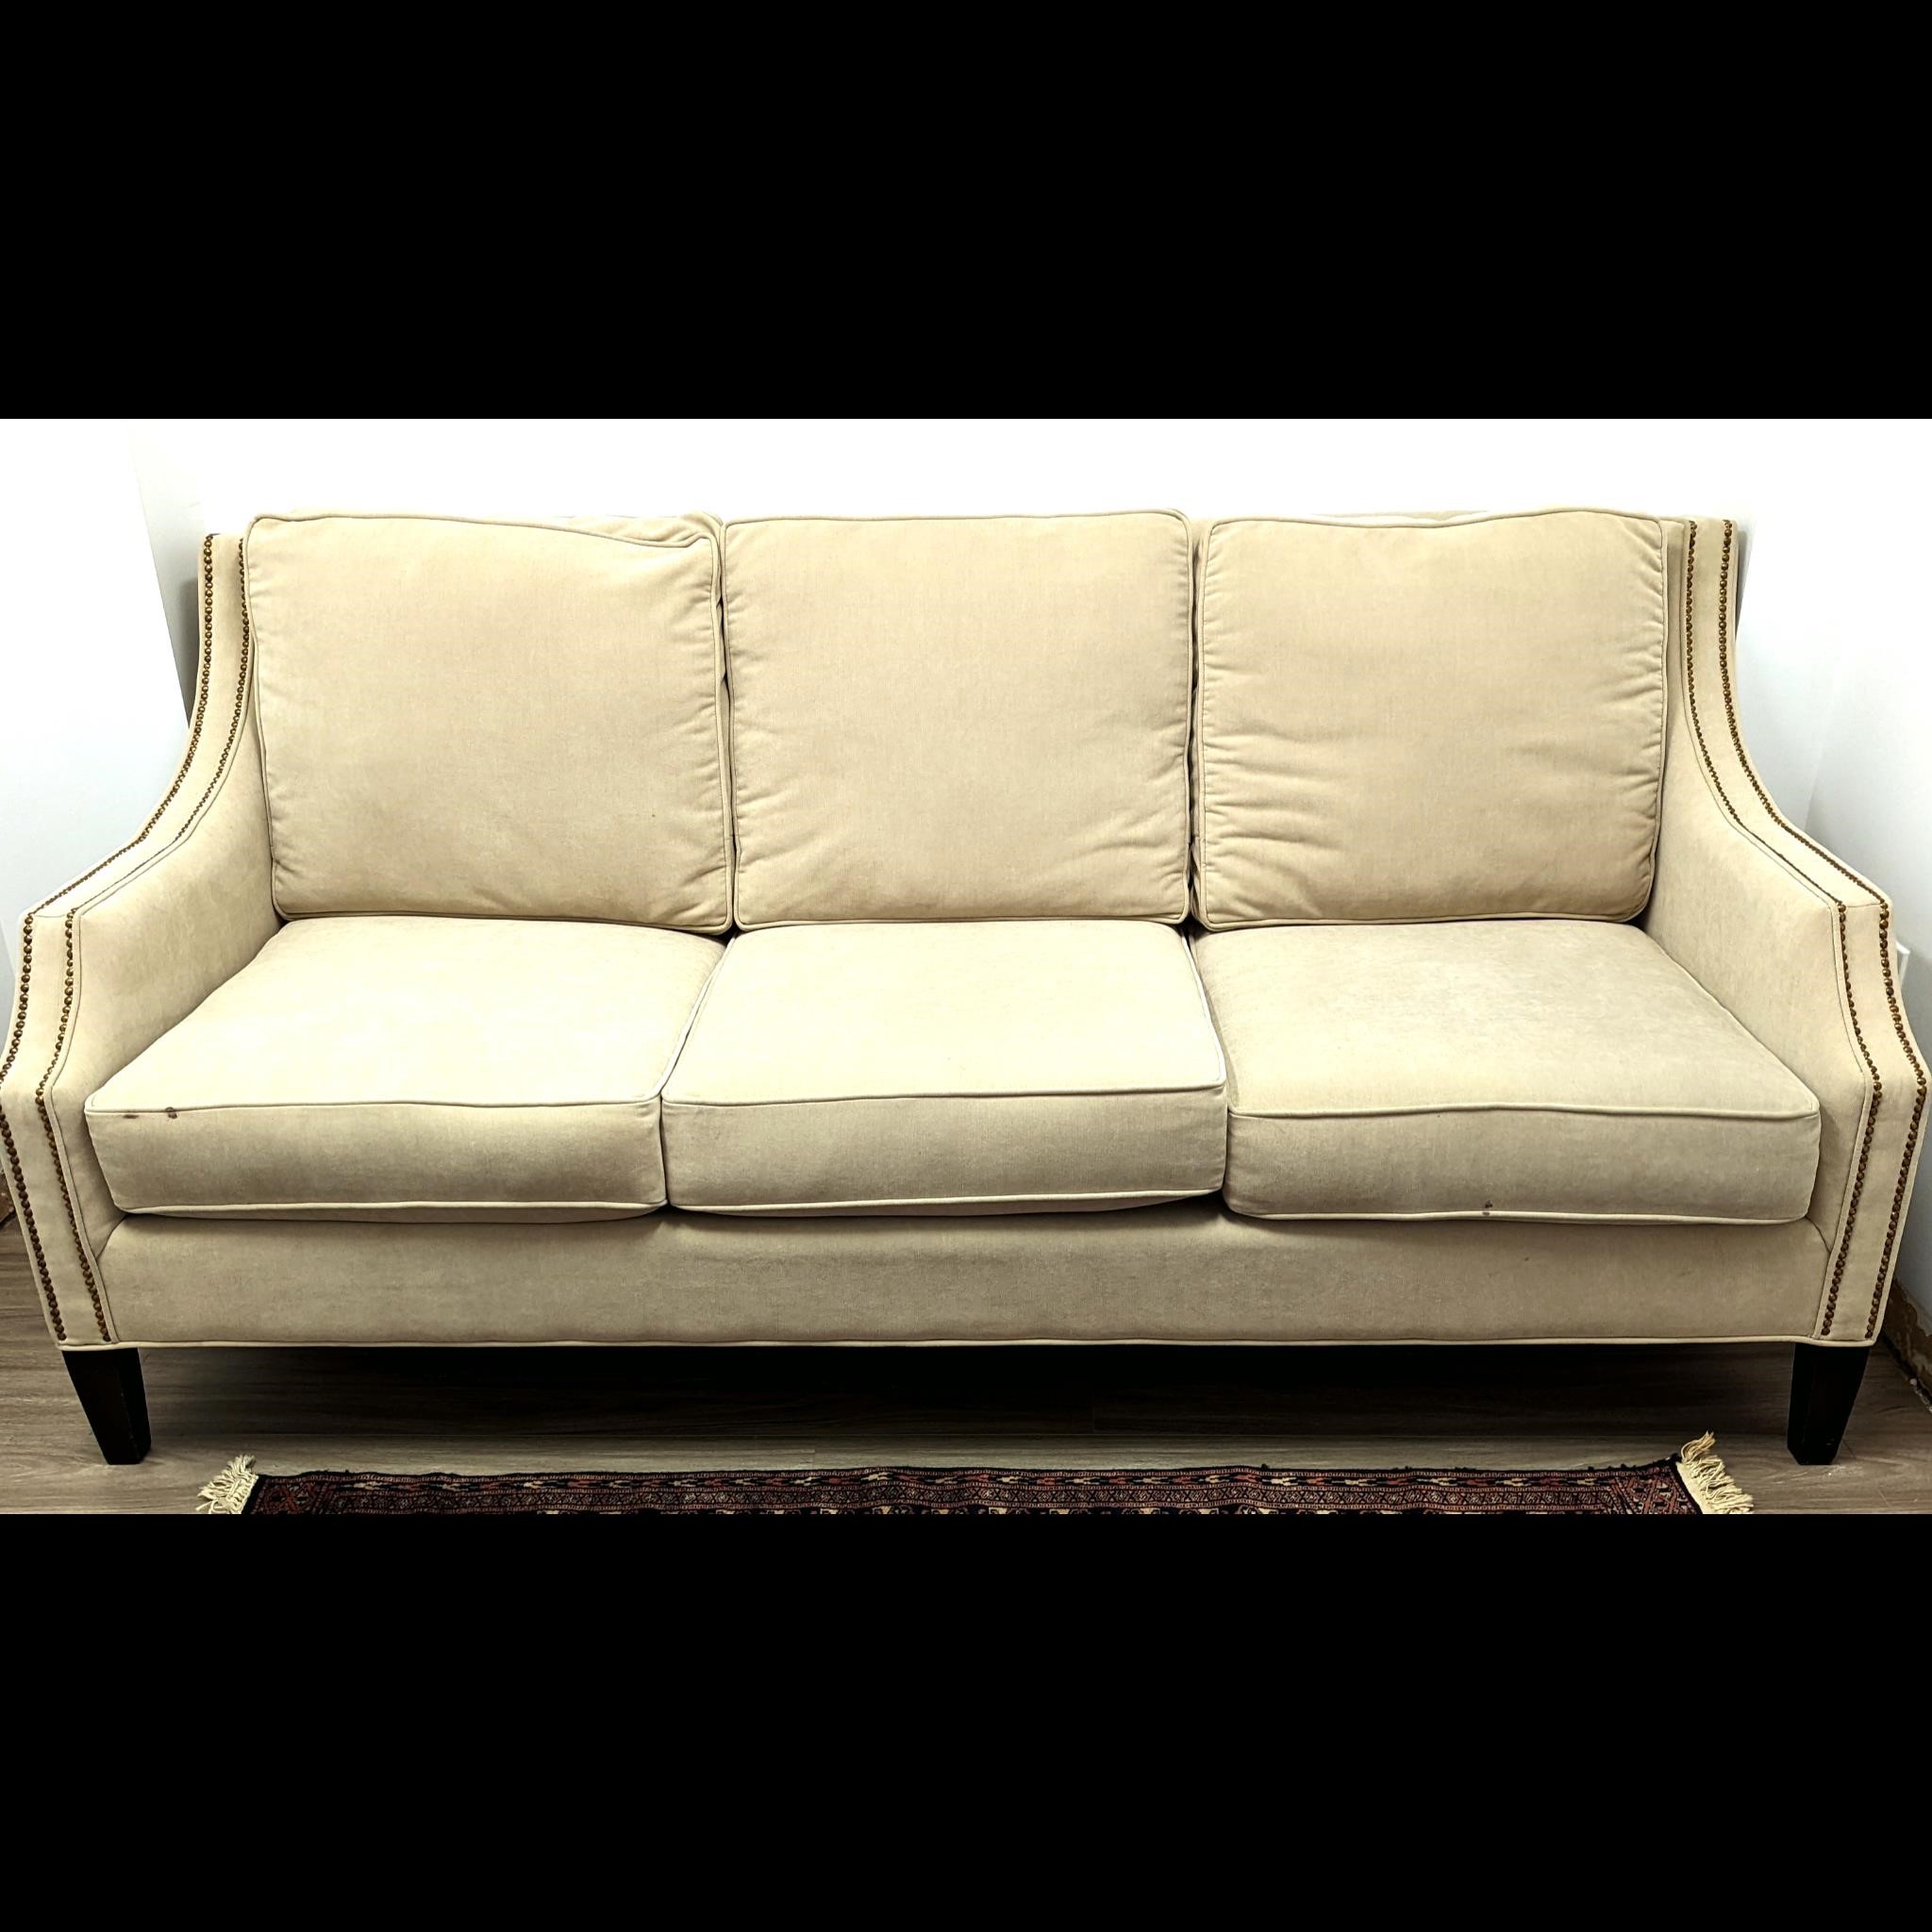 Classic 3 Seater Sofa Couch with Nailhead Trim